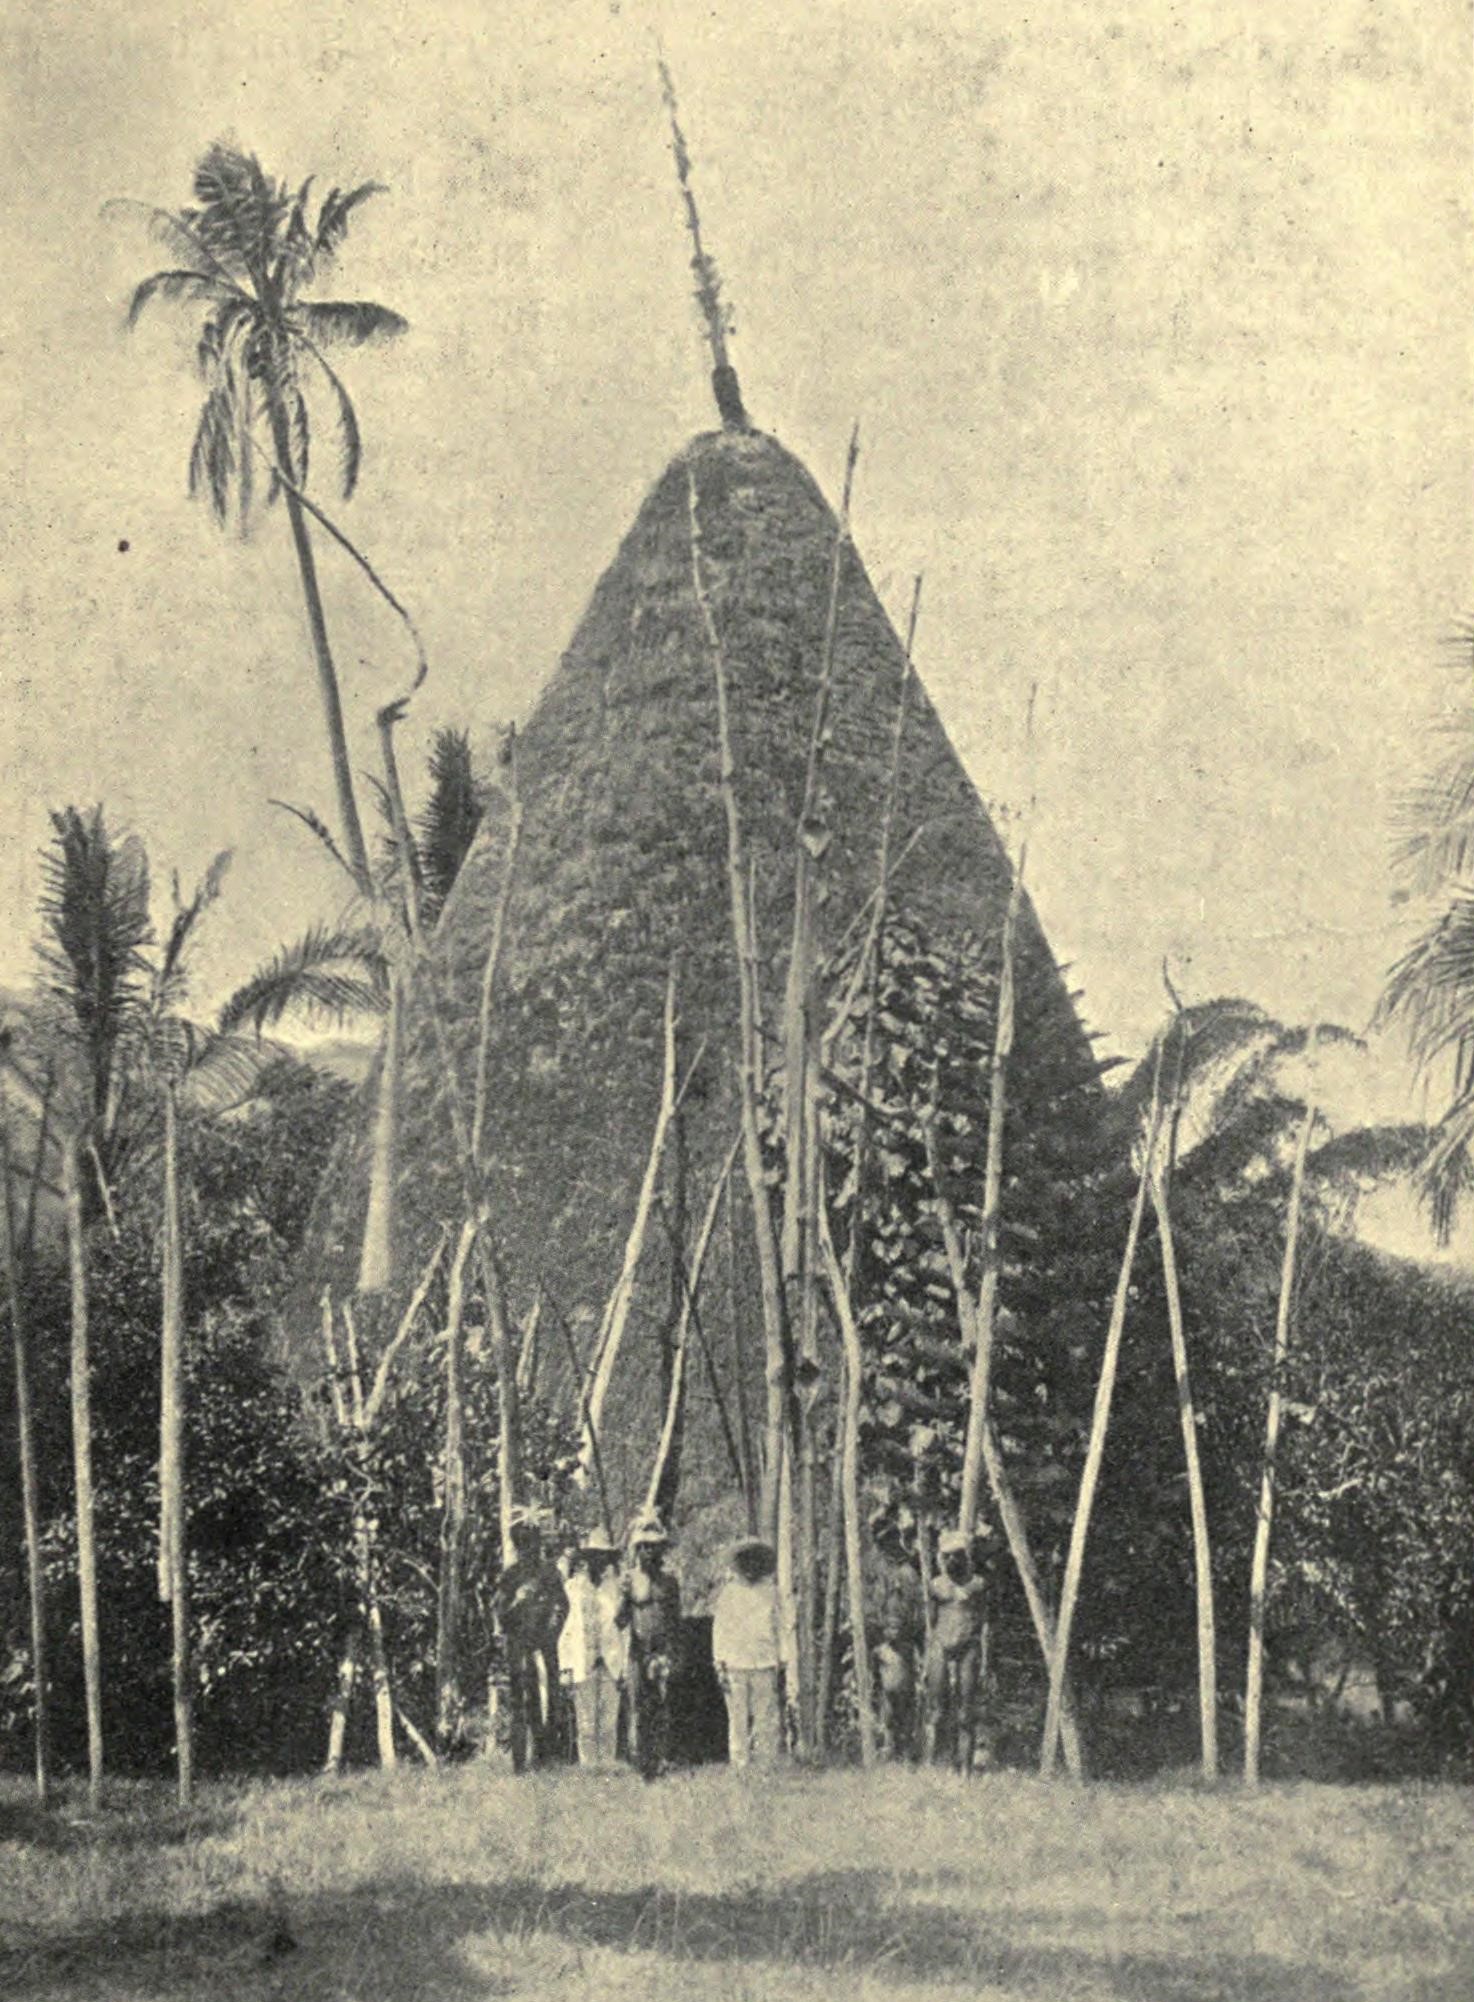 A Superb Chief’s House Roof Spire, Grande Terre Island, New Caledonia 18-19th Century